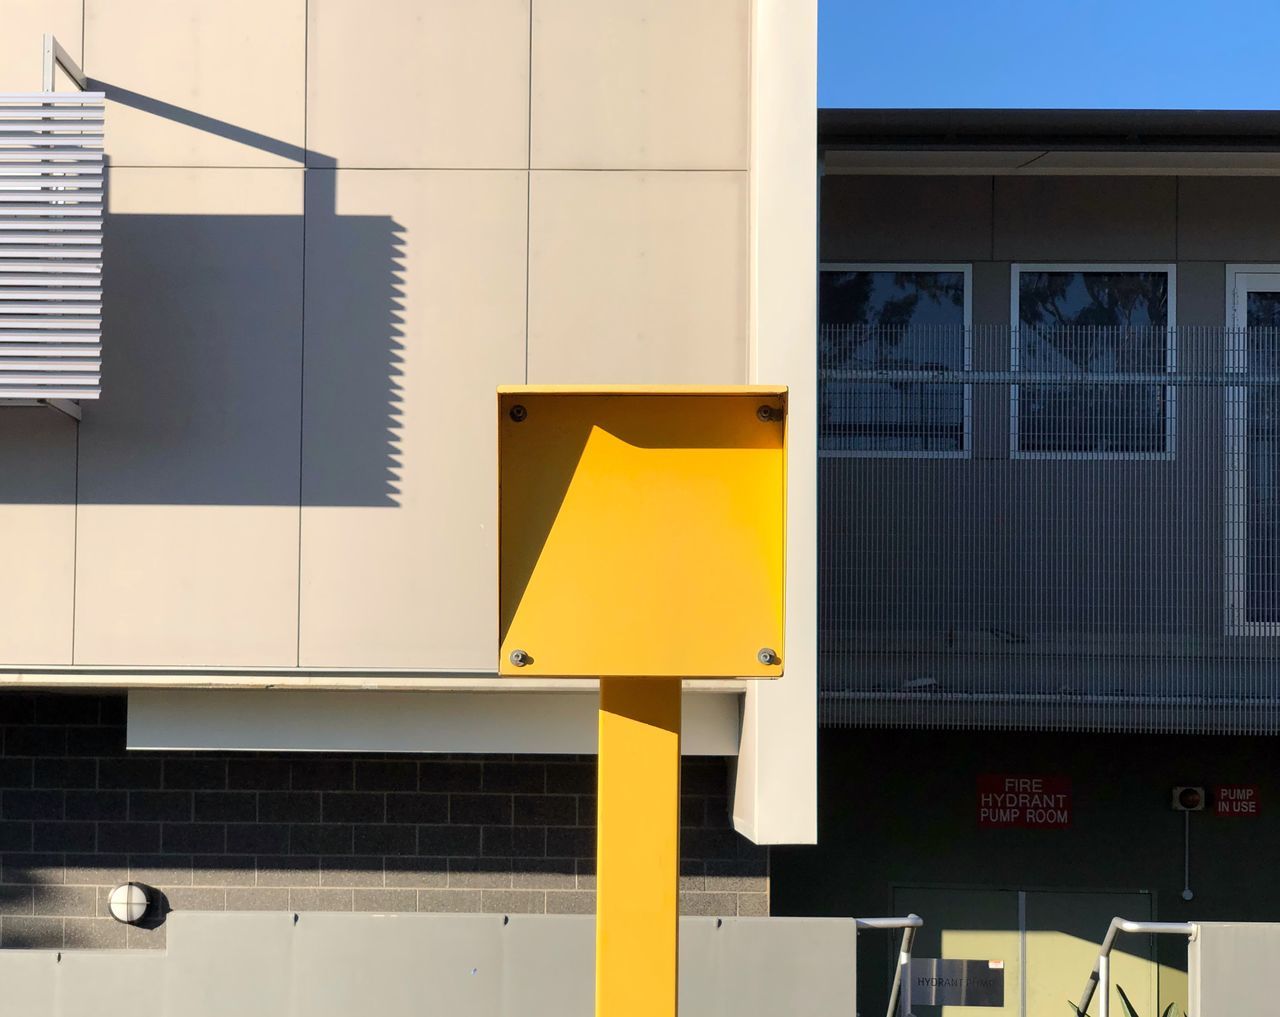 architecture, yellow, built structure, building exterior, no people, communication, sunlight, sign, building, outdoors, city, day, nature, shadow, metal, information, letter, wall - building feature, close-up, residential district